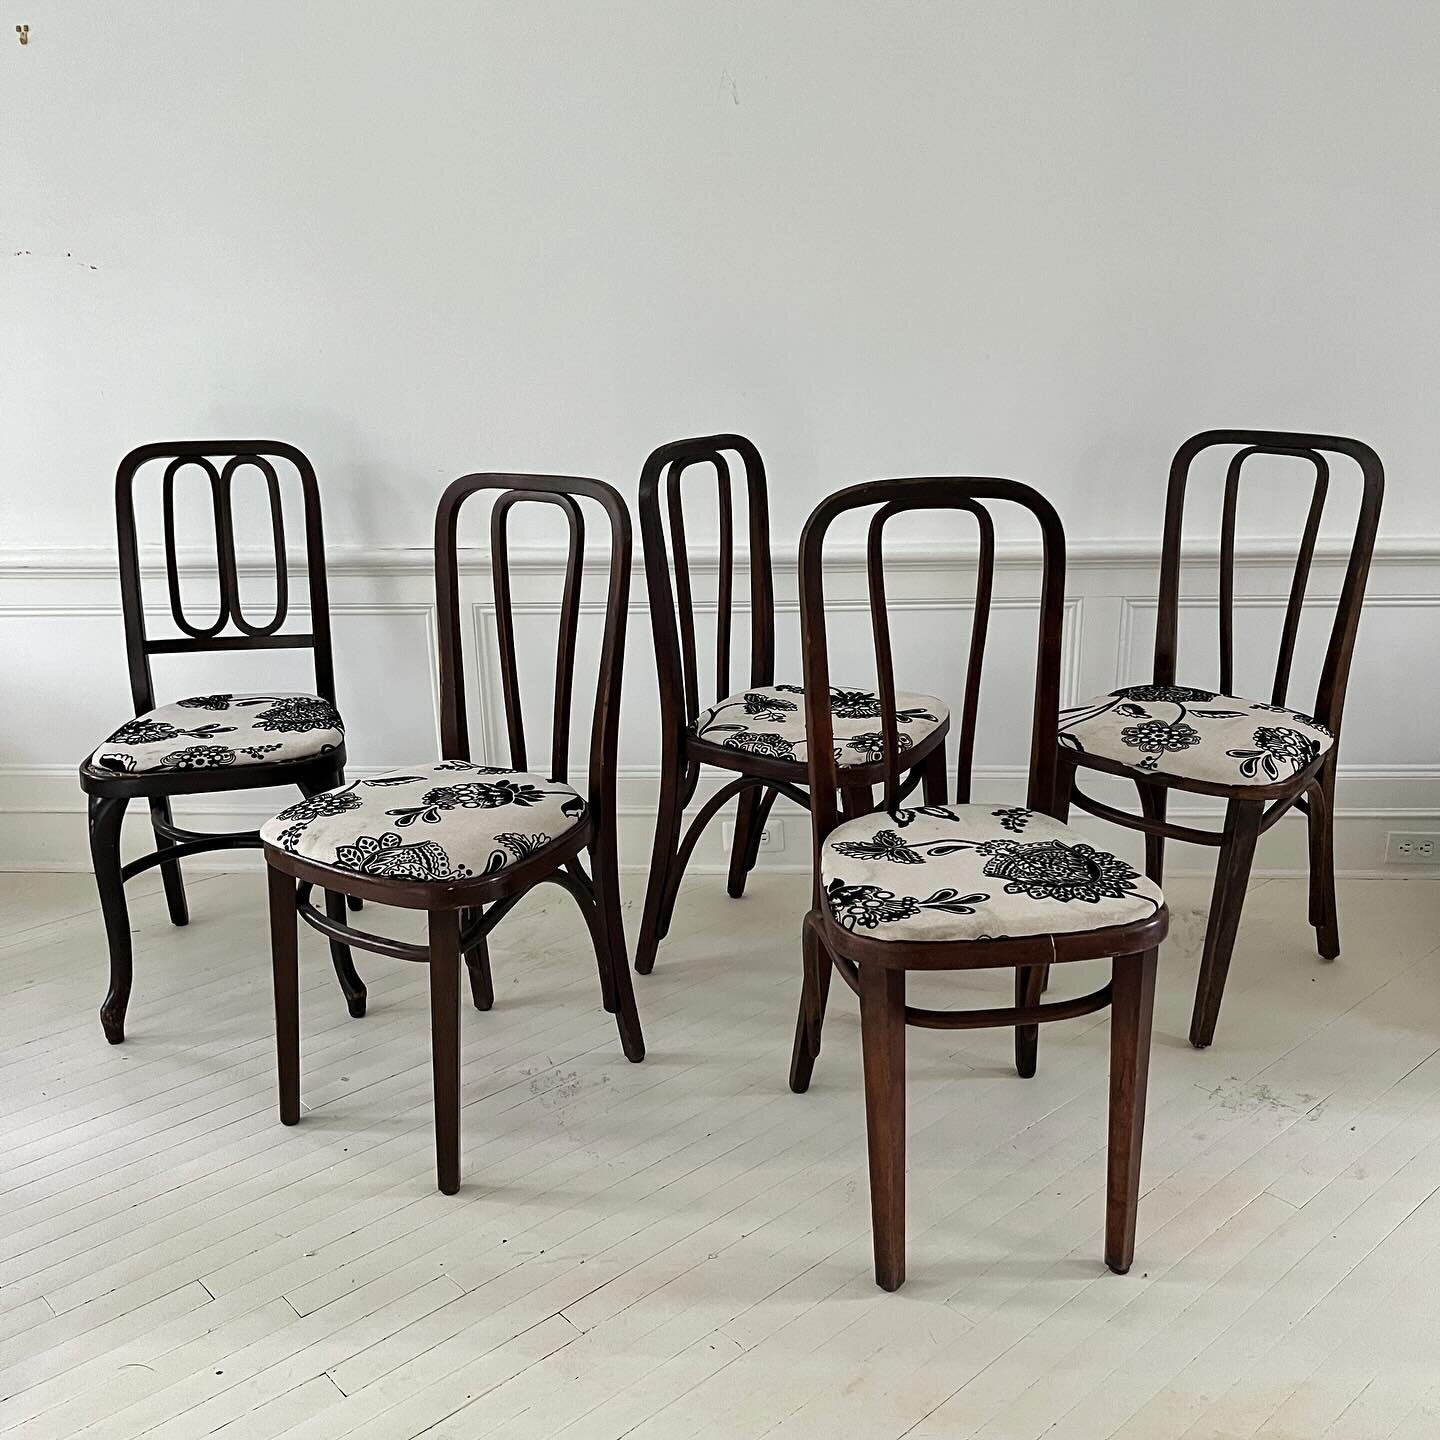 5 bentwood bistro chairs, attributed to Thonet.  One is mismatched, but is part of the family.  Seats have been replaced and covered.  Overall wear throughout. All chairs are sturdy, except for one which has had repairs (see all photos). 

$495 takes